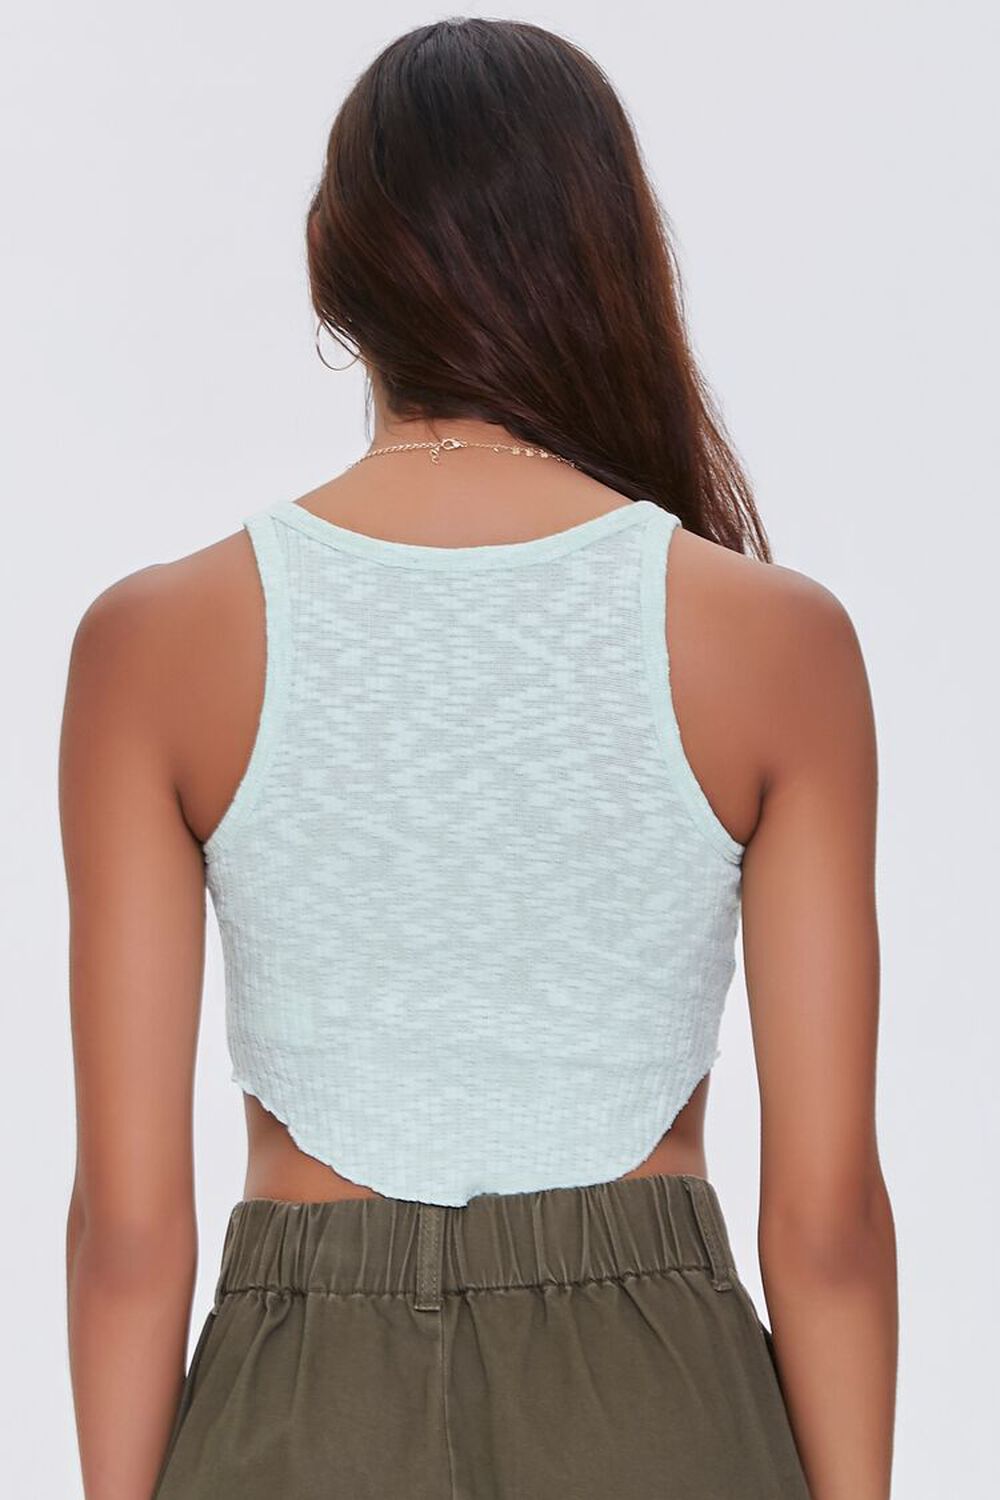 MINT Heathered Cropped Tank Top, image 3